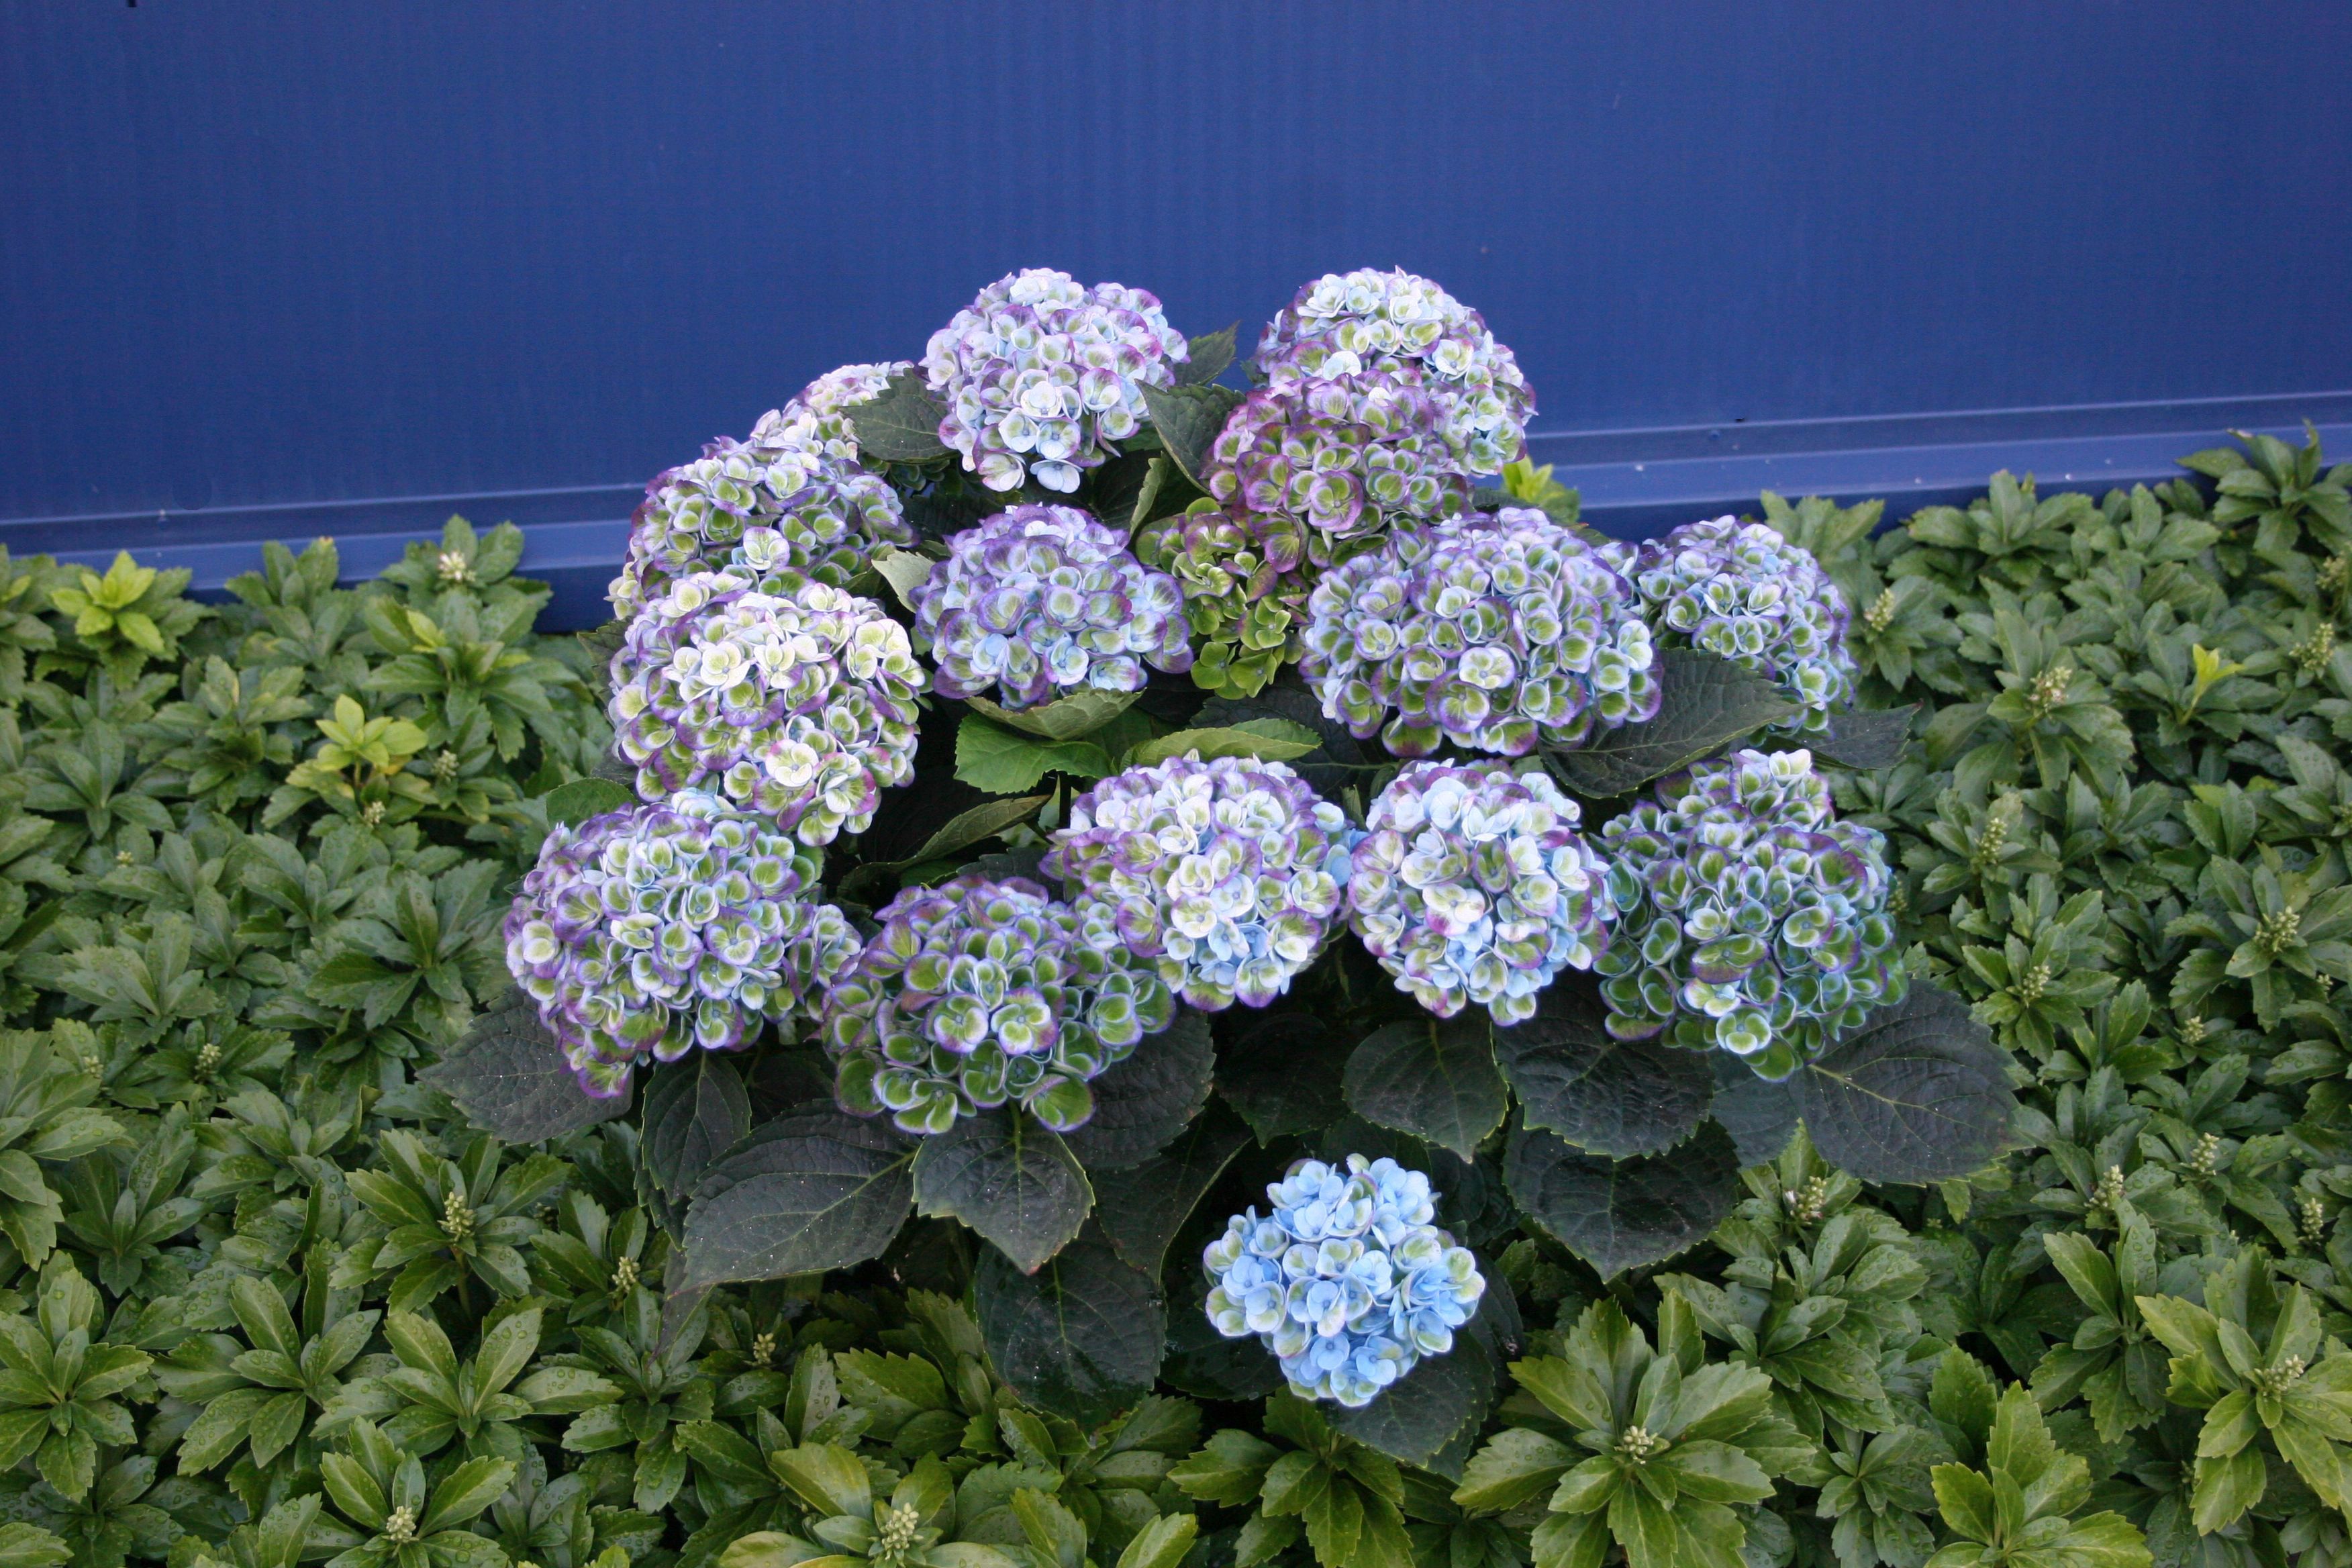 images/plants/hydrangea/hyd-magical-everlasting-revolution/hyd-magical-everlasting-revolution-0077.jpg